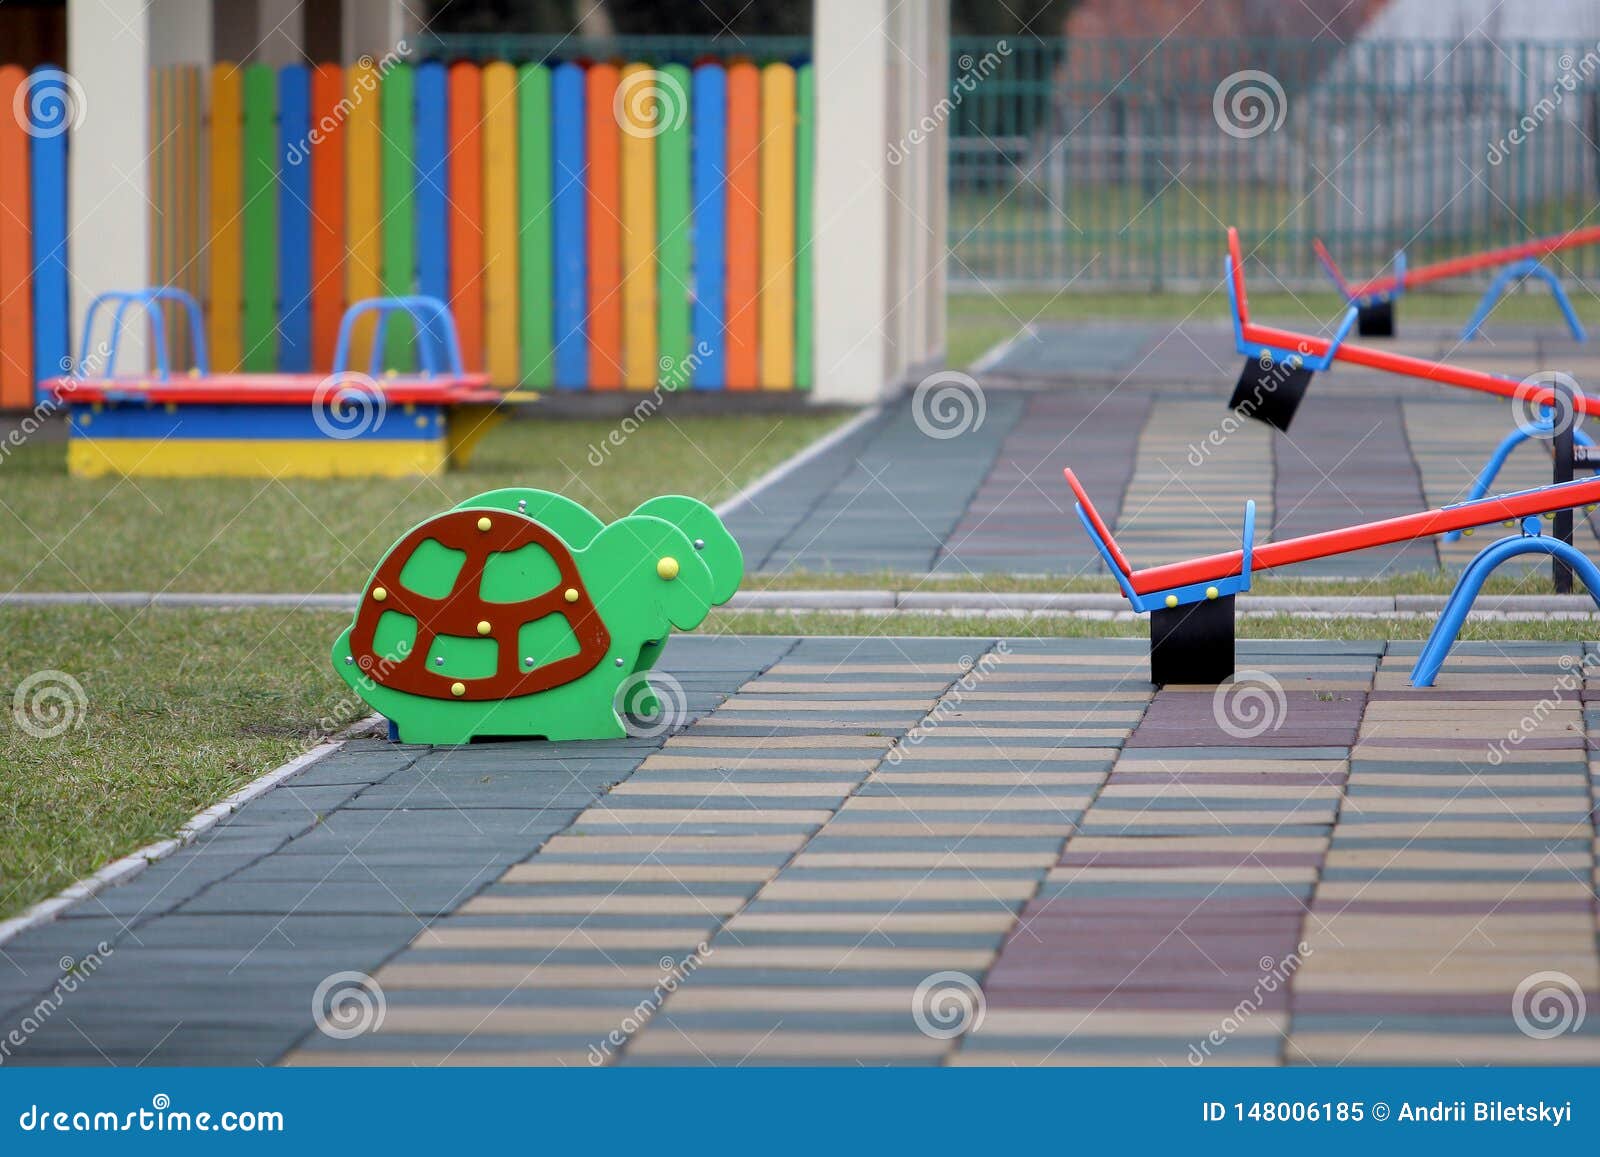 Bright Colorful Funny Bench On Nursery Playground With Soft Rubber